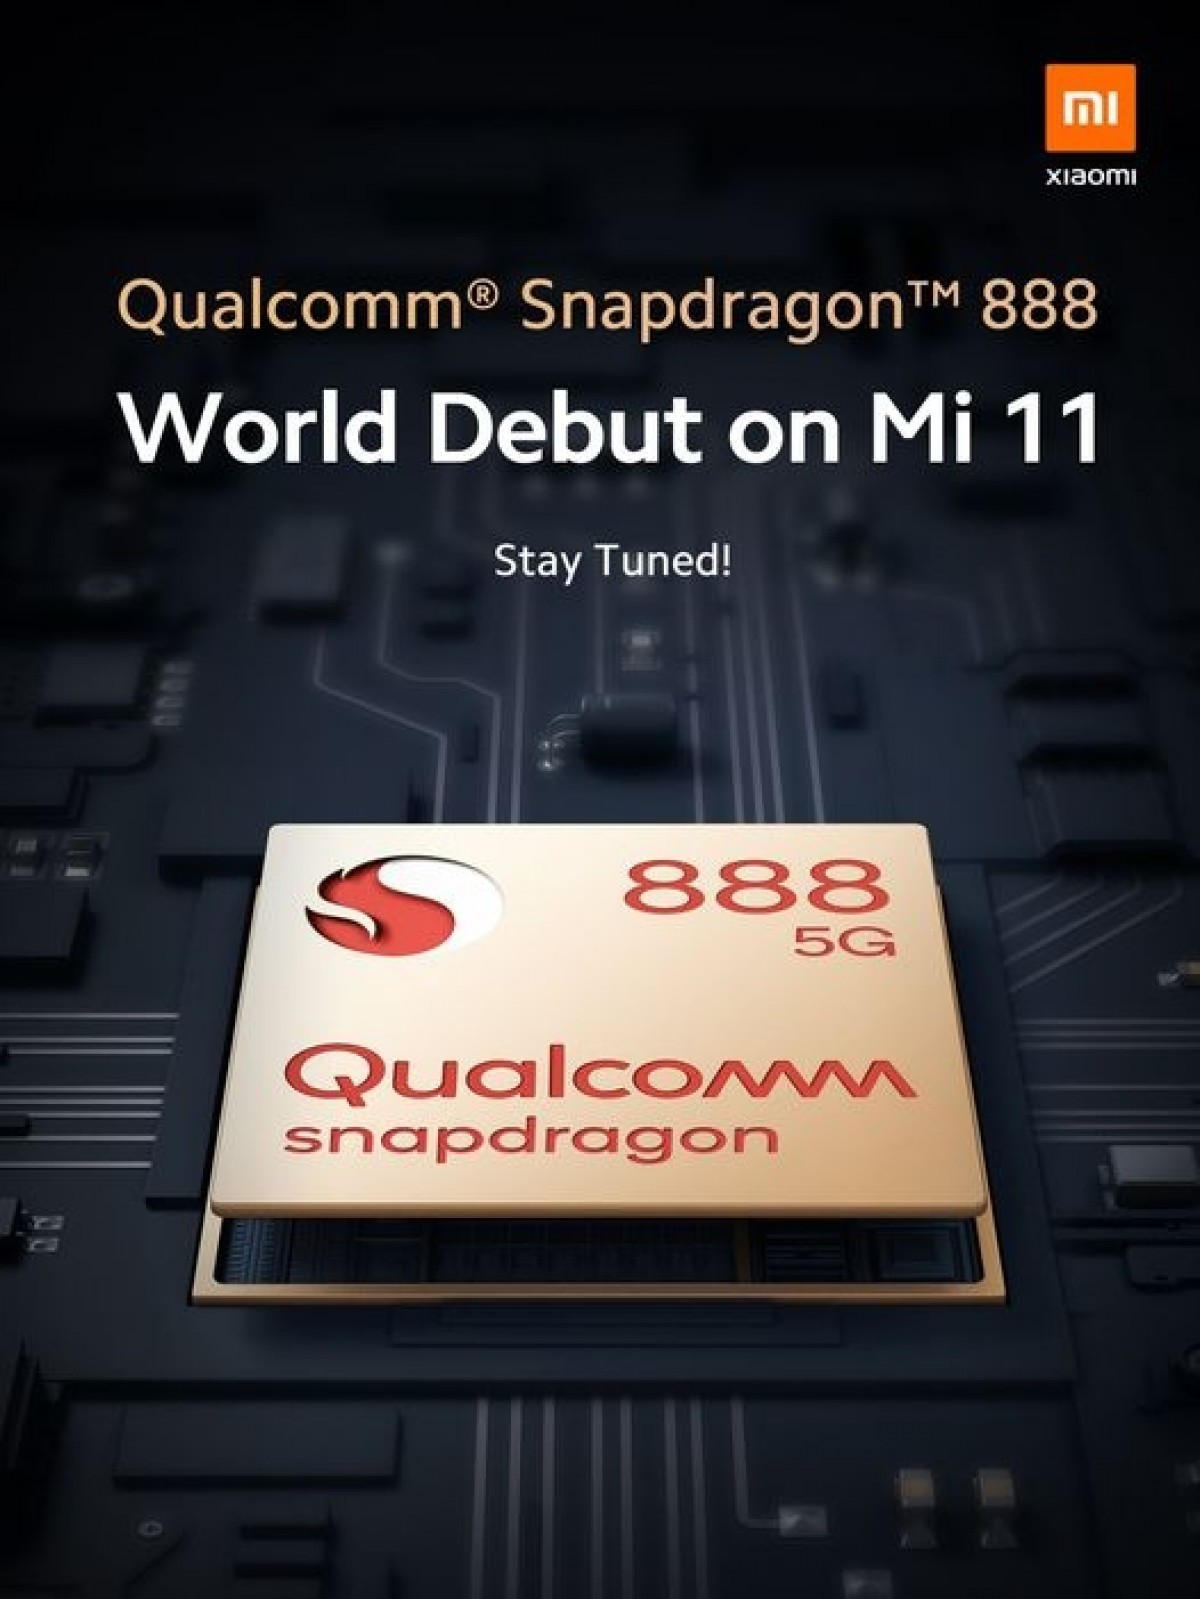 Xiaomi Mi 11 to be the world’s first phone with Snapdragon 888, Redmi tags along